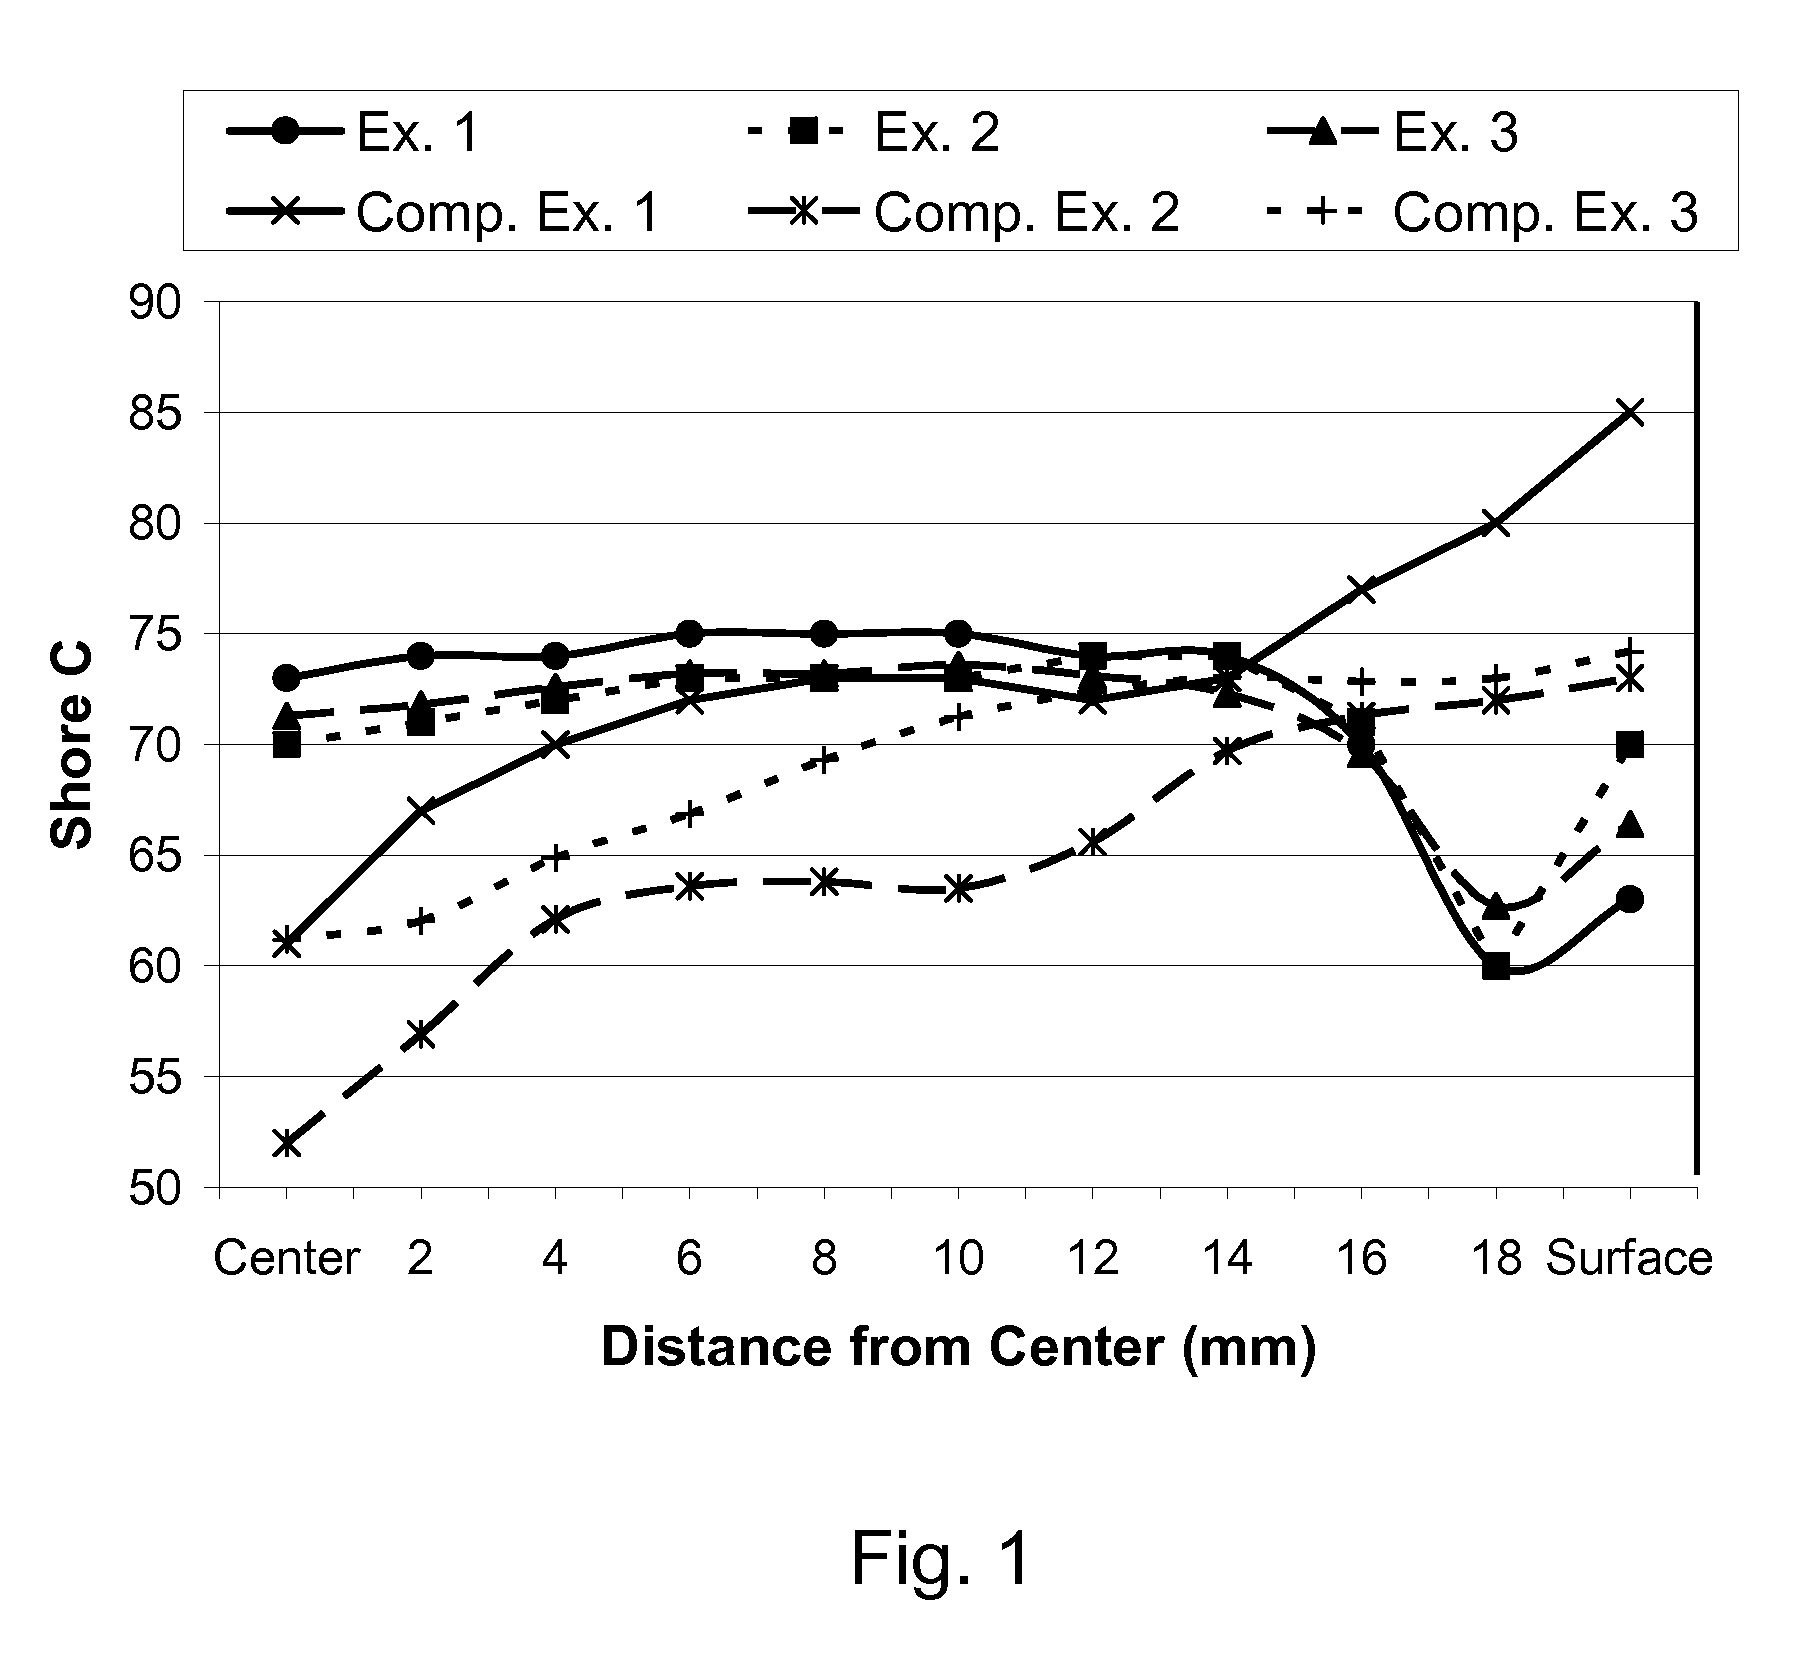 Multi-layer core golf ball having opposing hardness gradient with steep gradient outer core layer